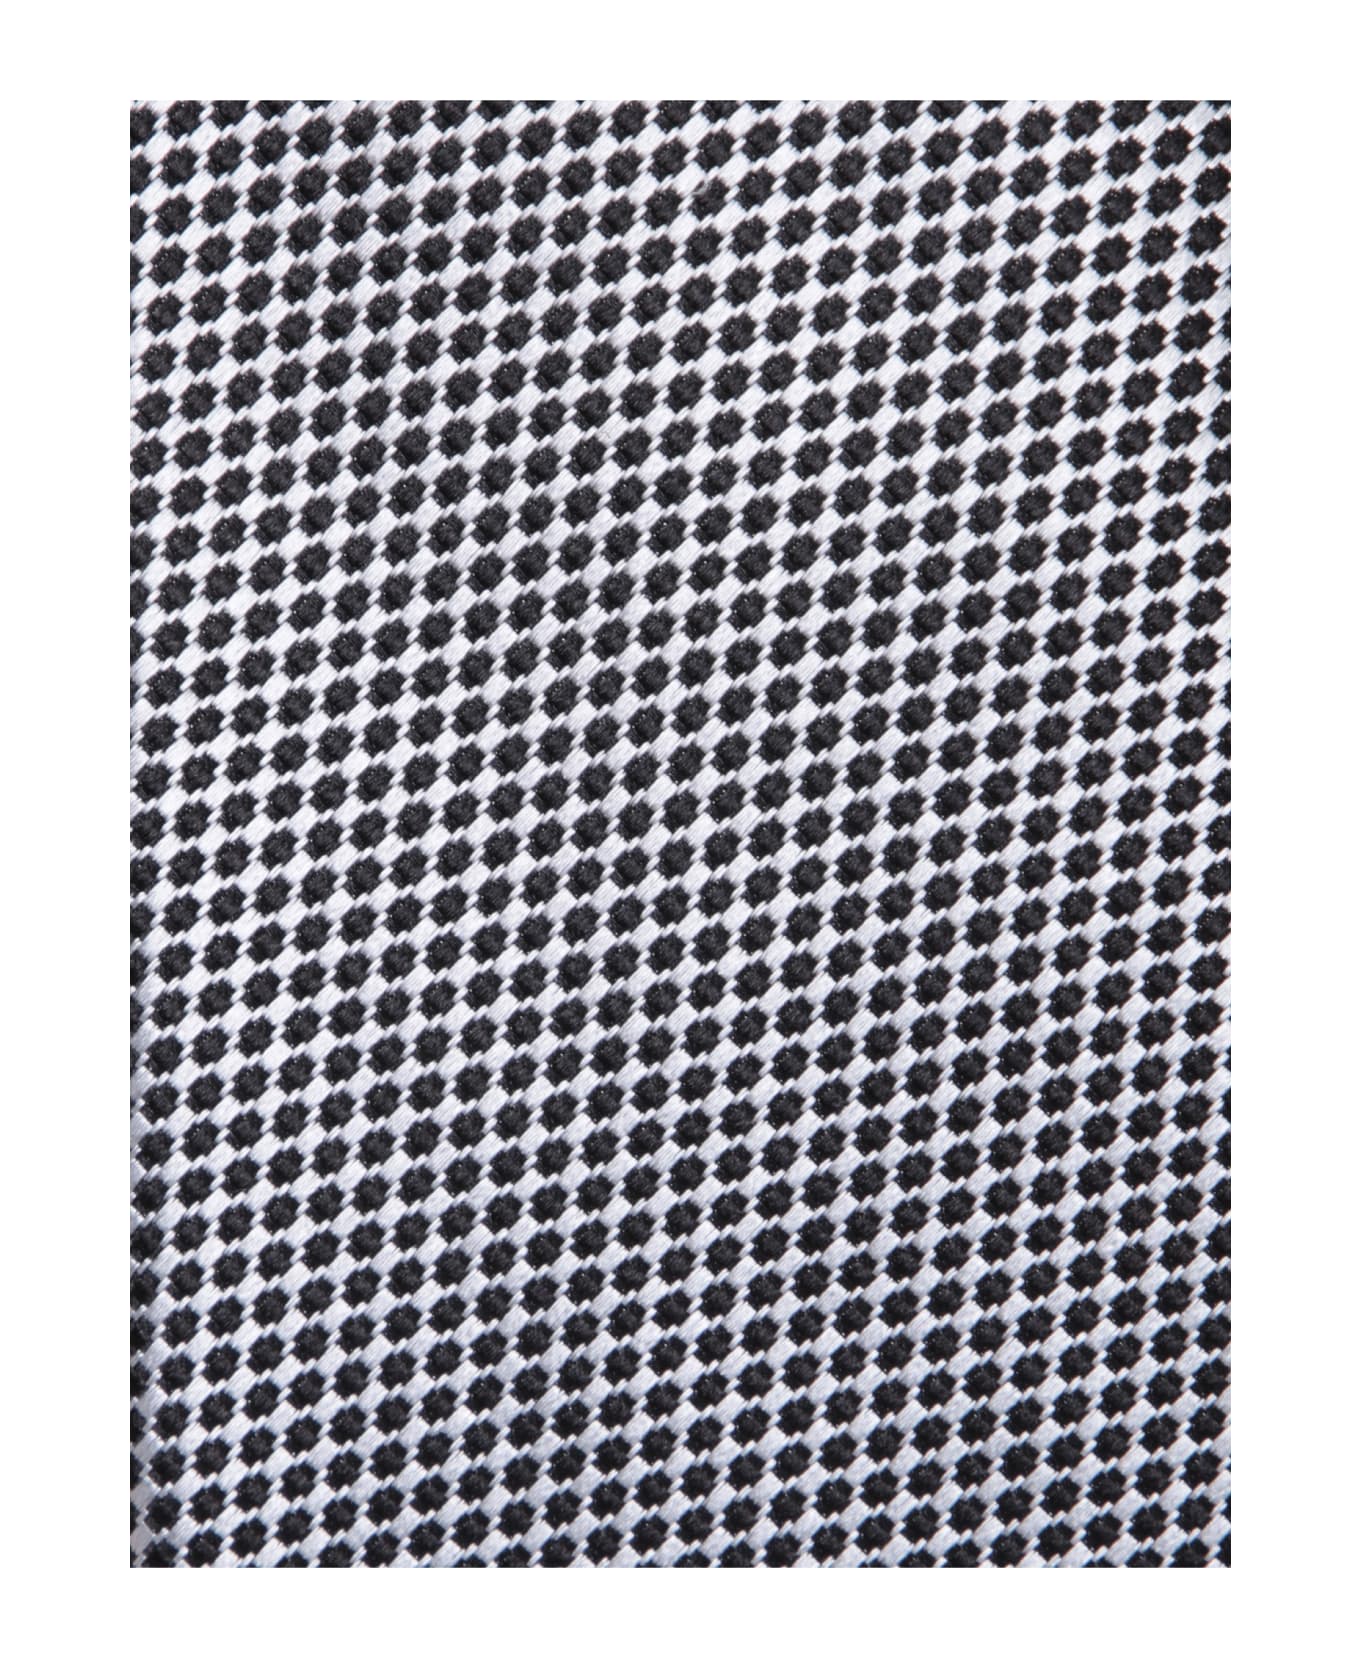 Tom Ford Micro-pattern Silver Tie - Grey